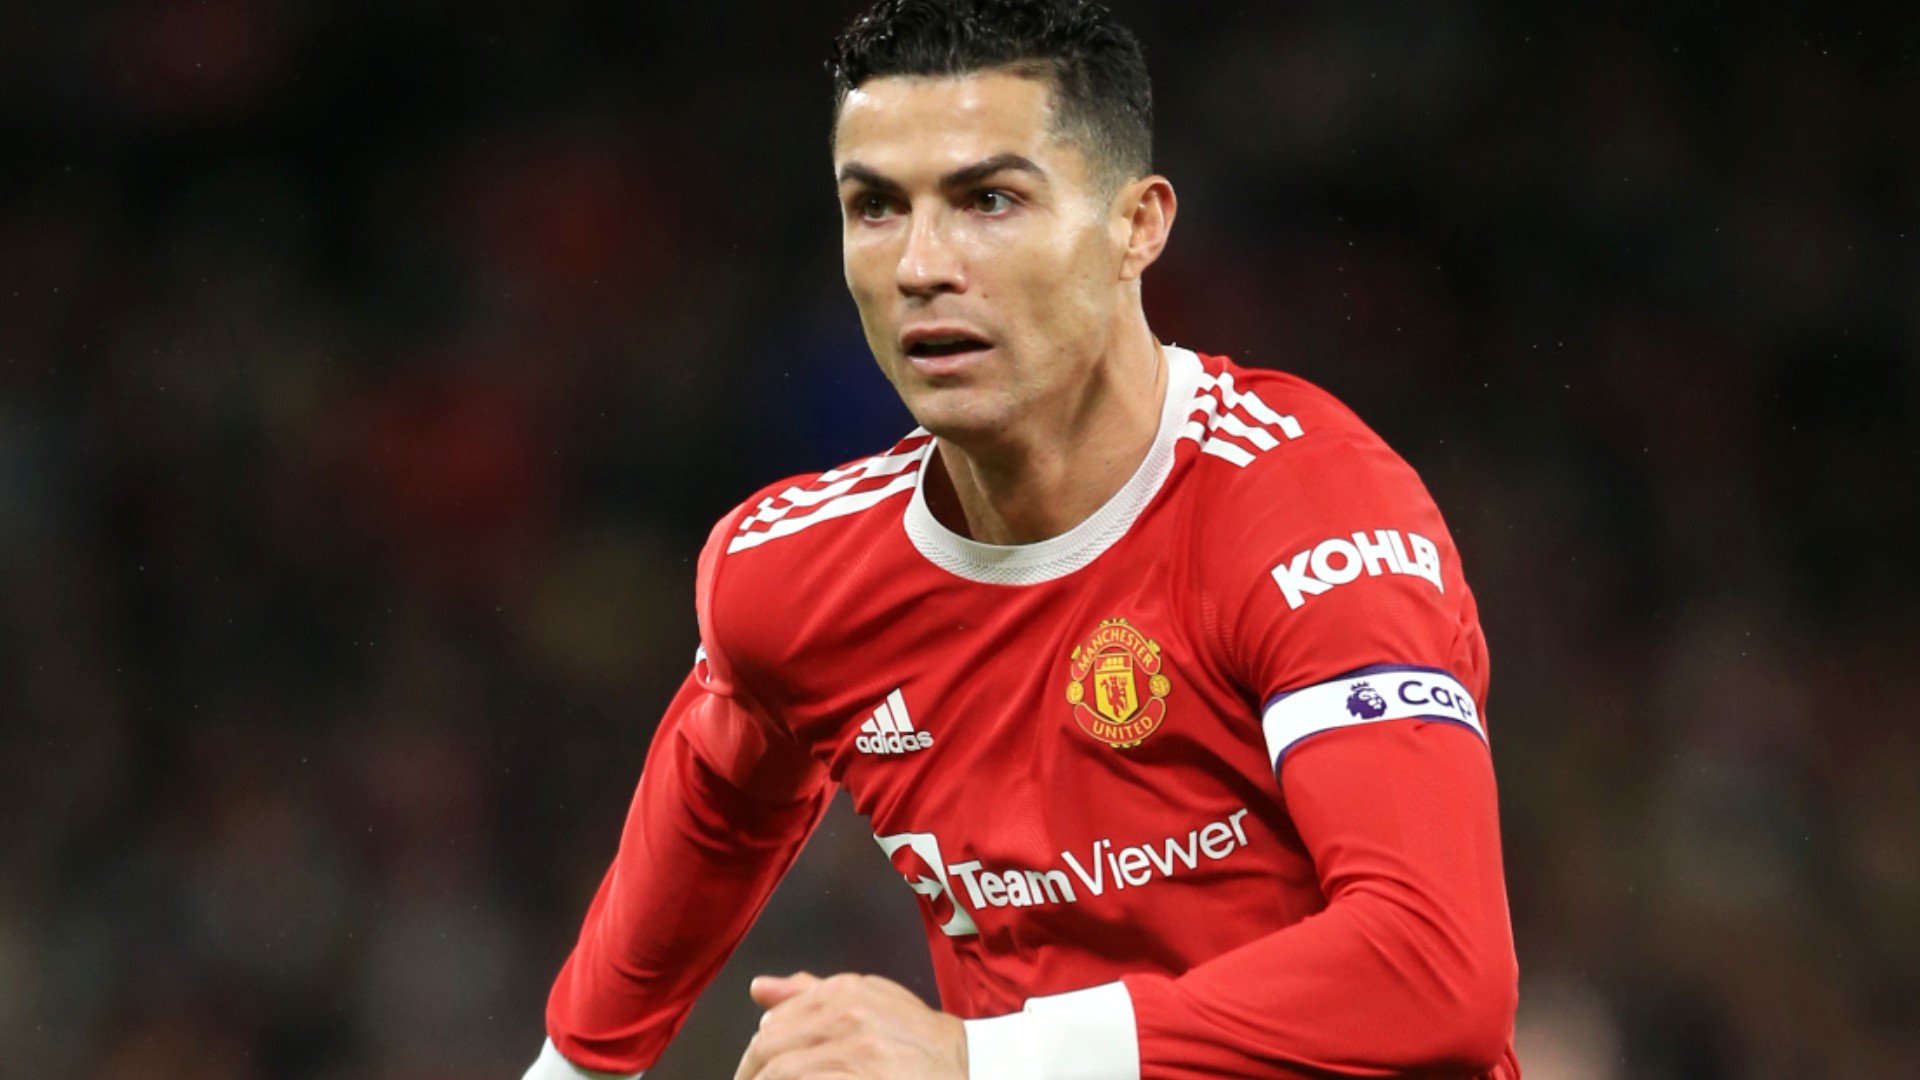 Why Cristiano Ronaldo captained Manchester United vs. Wolves for the first time since 2008